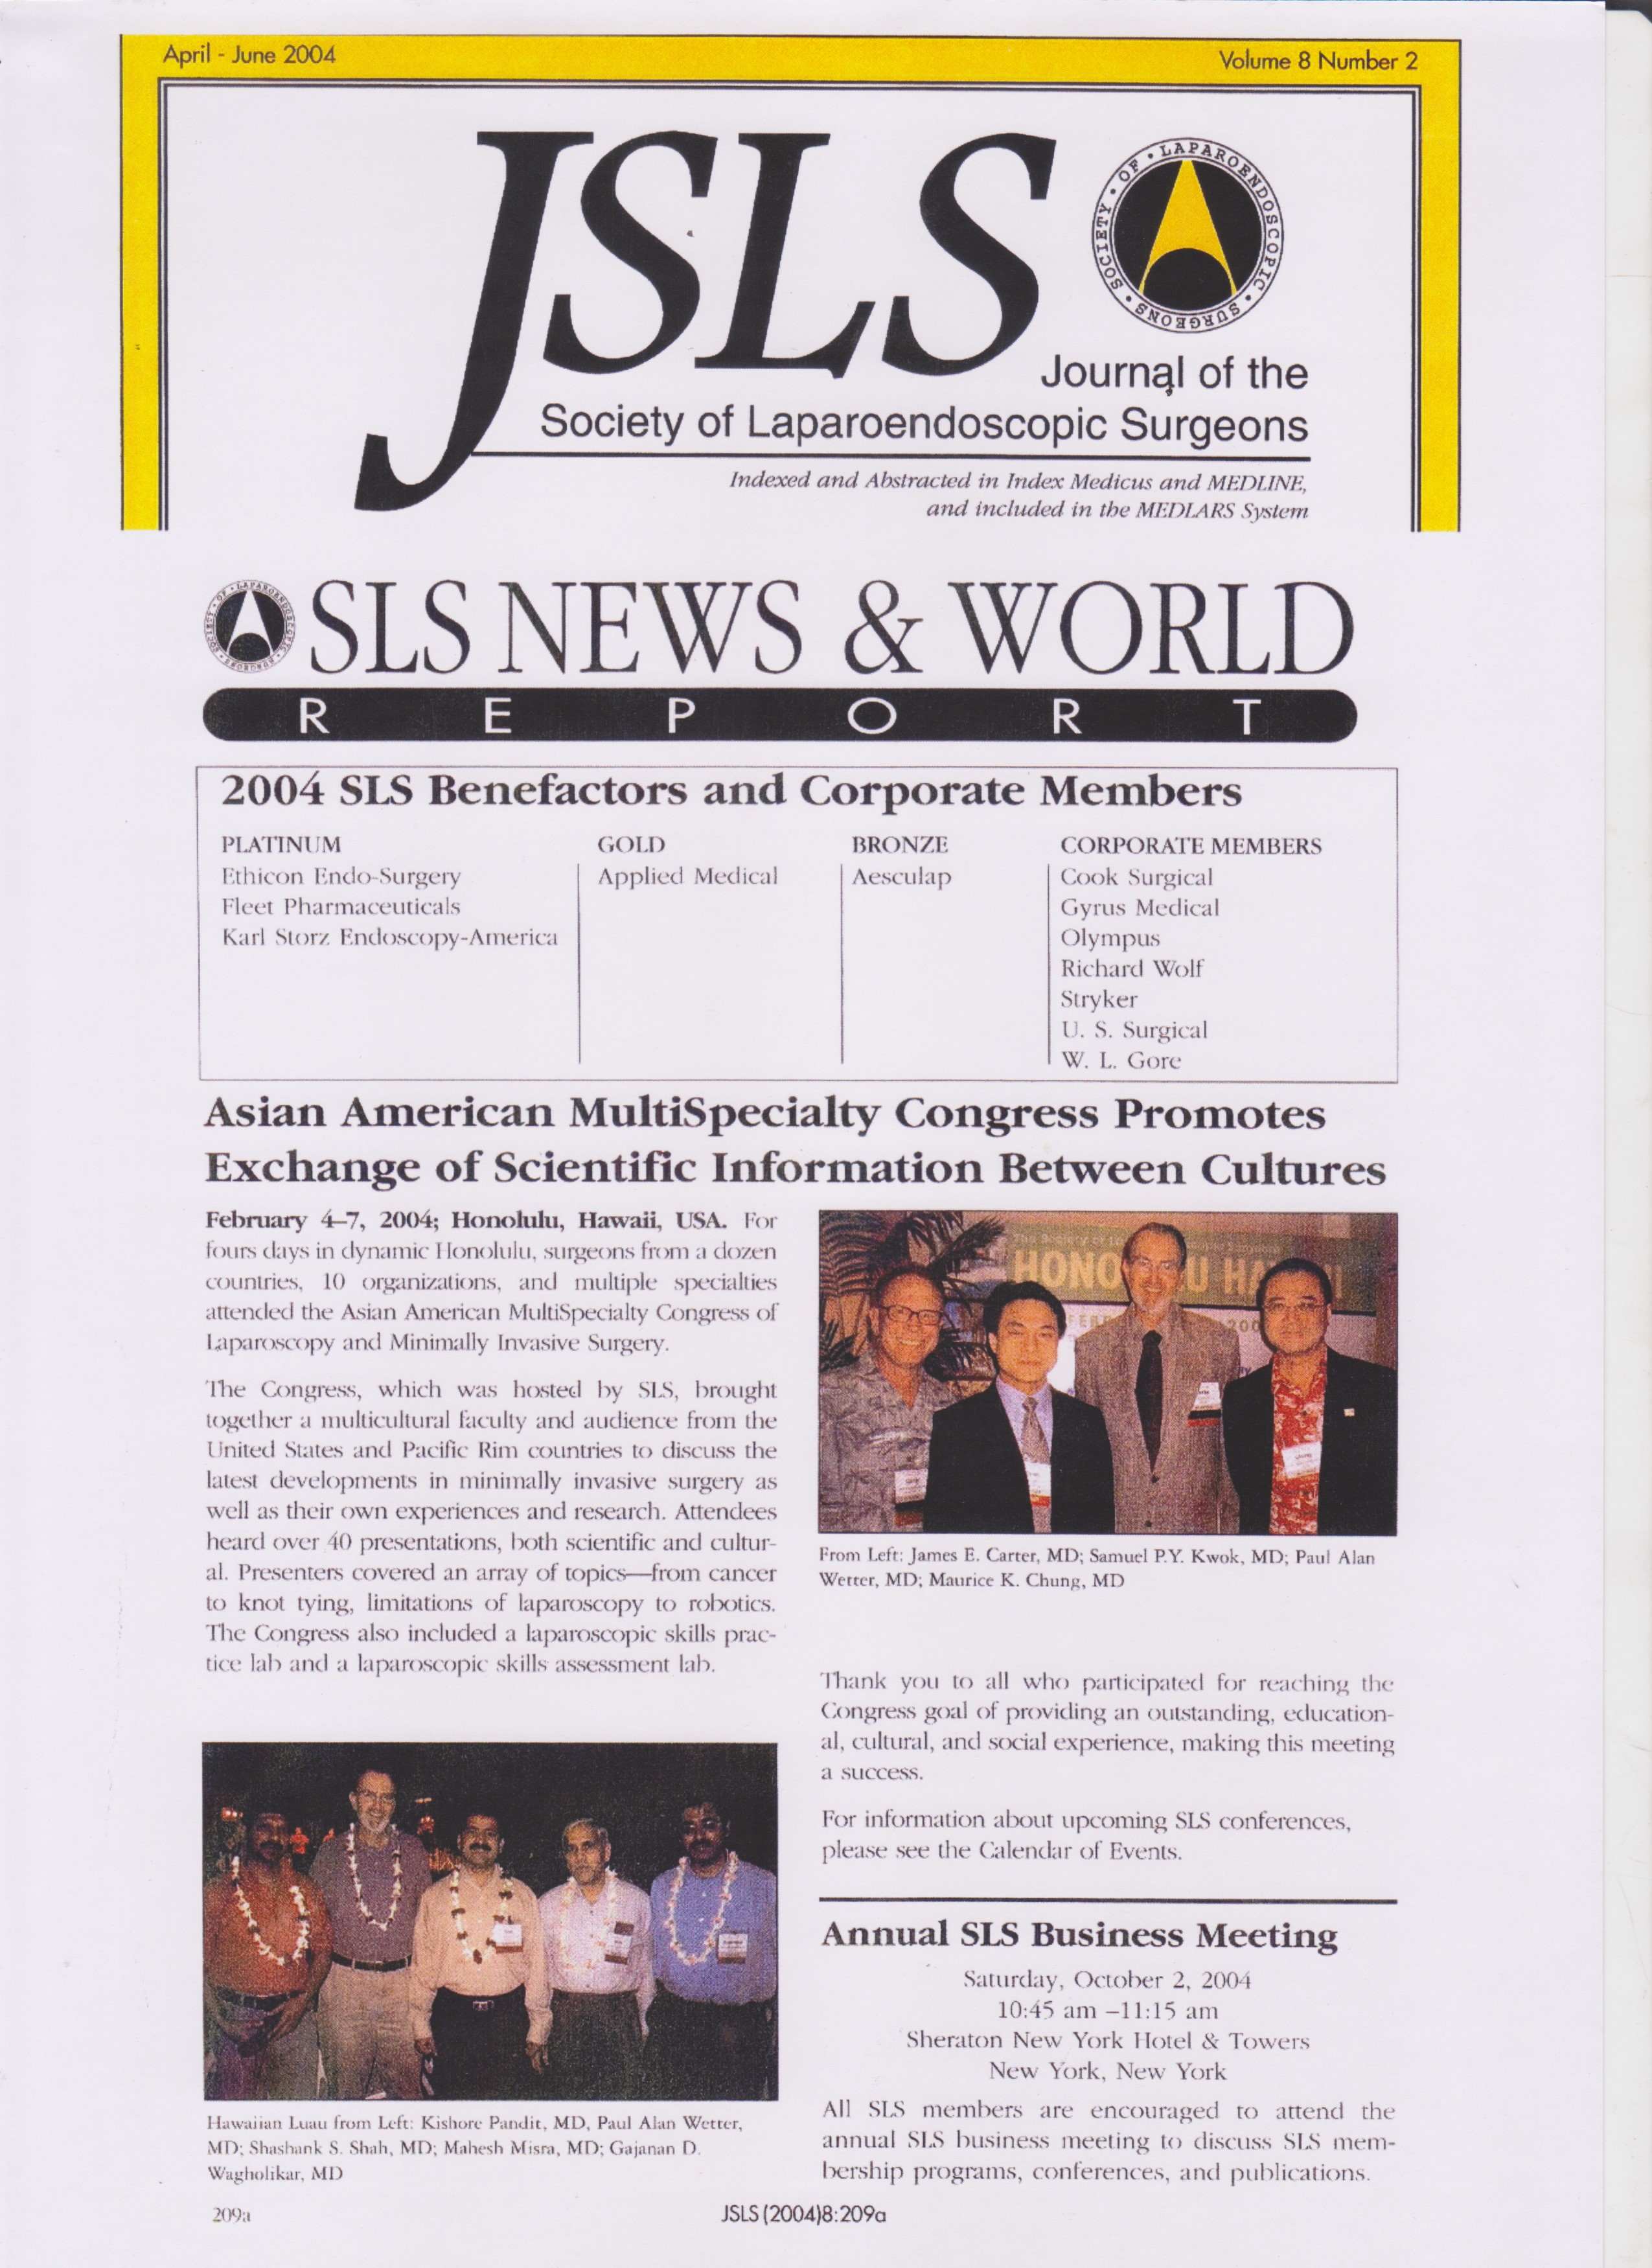 A promotion of Cultural Exchange of Scientific Information between Cultures was held at the Asian American Multispecialty Congress of Laparoscopic and Minimal Invasive Surgery held at Honolulu, Hawaii, USA in 2004. Dr Shashank Shah was among the selected Asian Surgeons, the article was published in the Journal of the Society of Laproendoscopic Surgeons (JSLS).